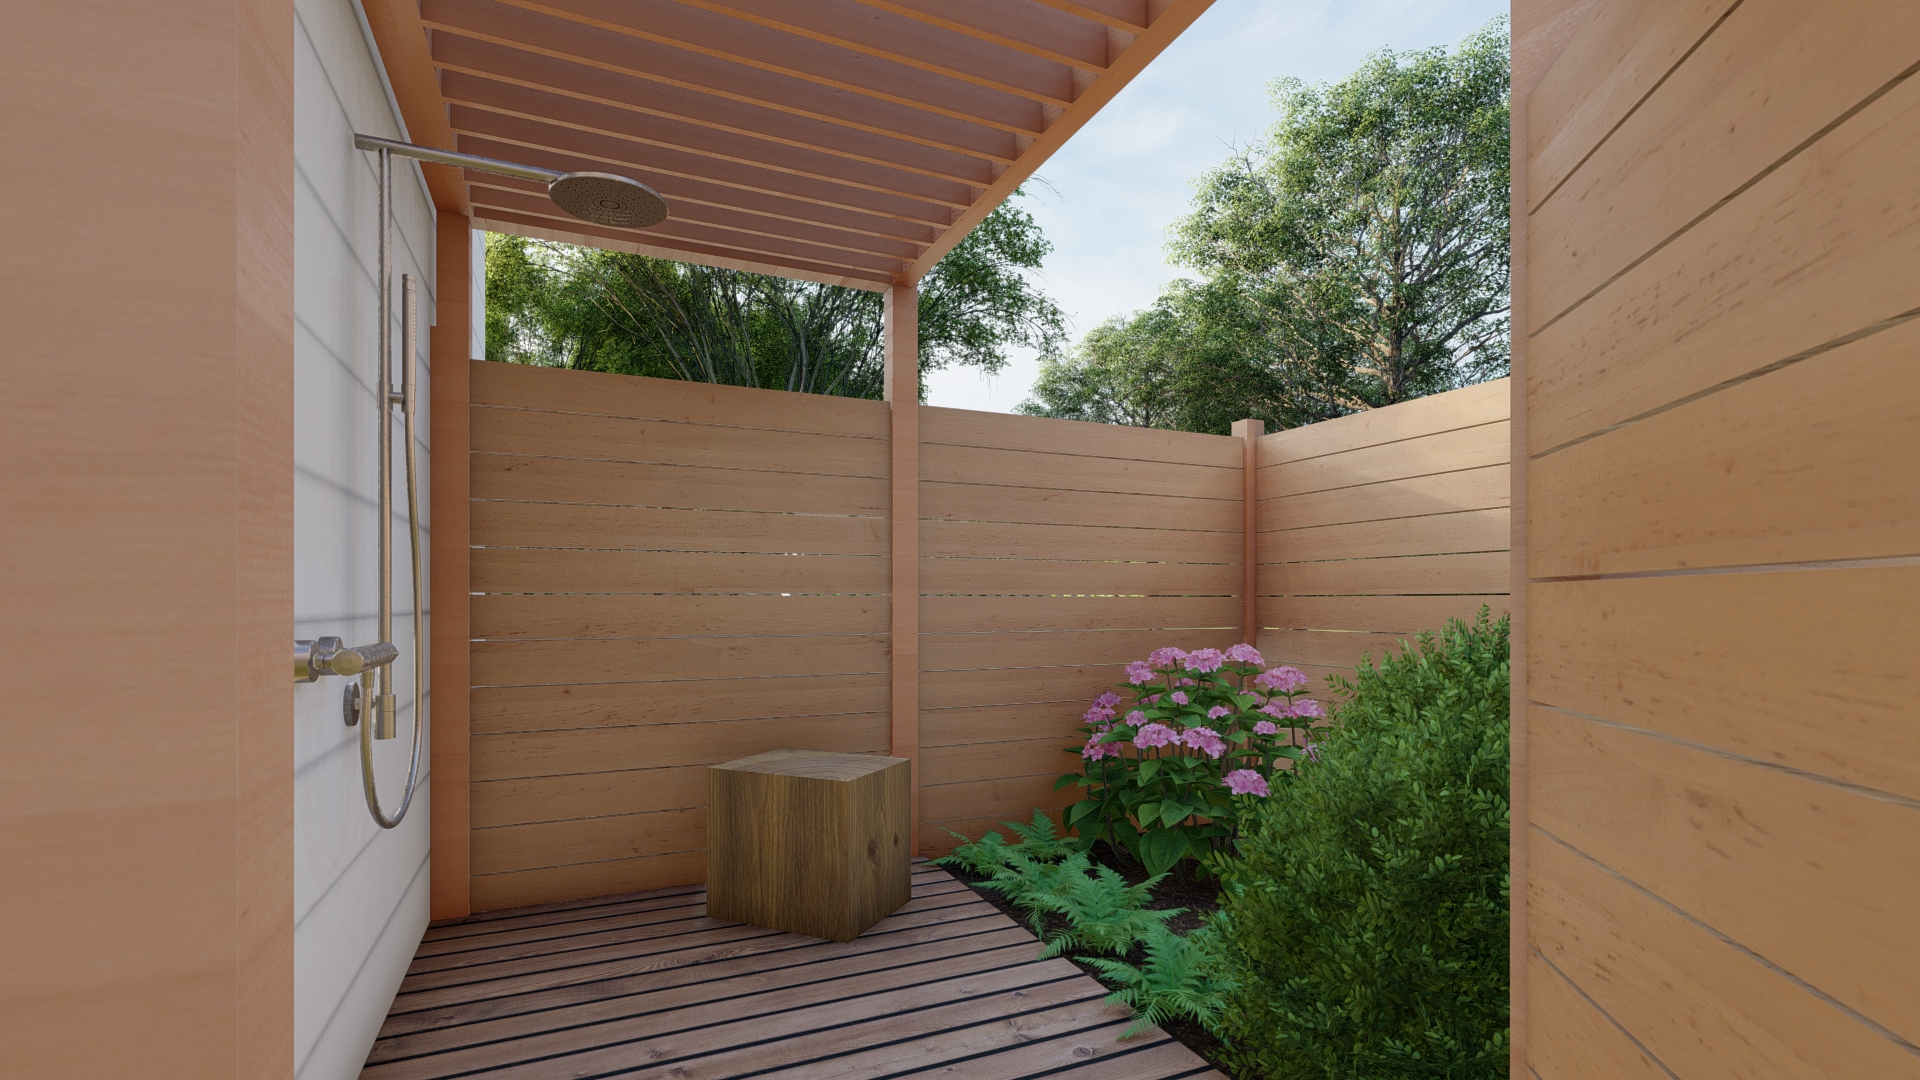 A wooden outdoor shower with lush plantings